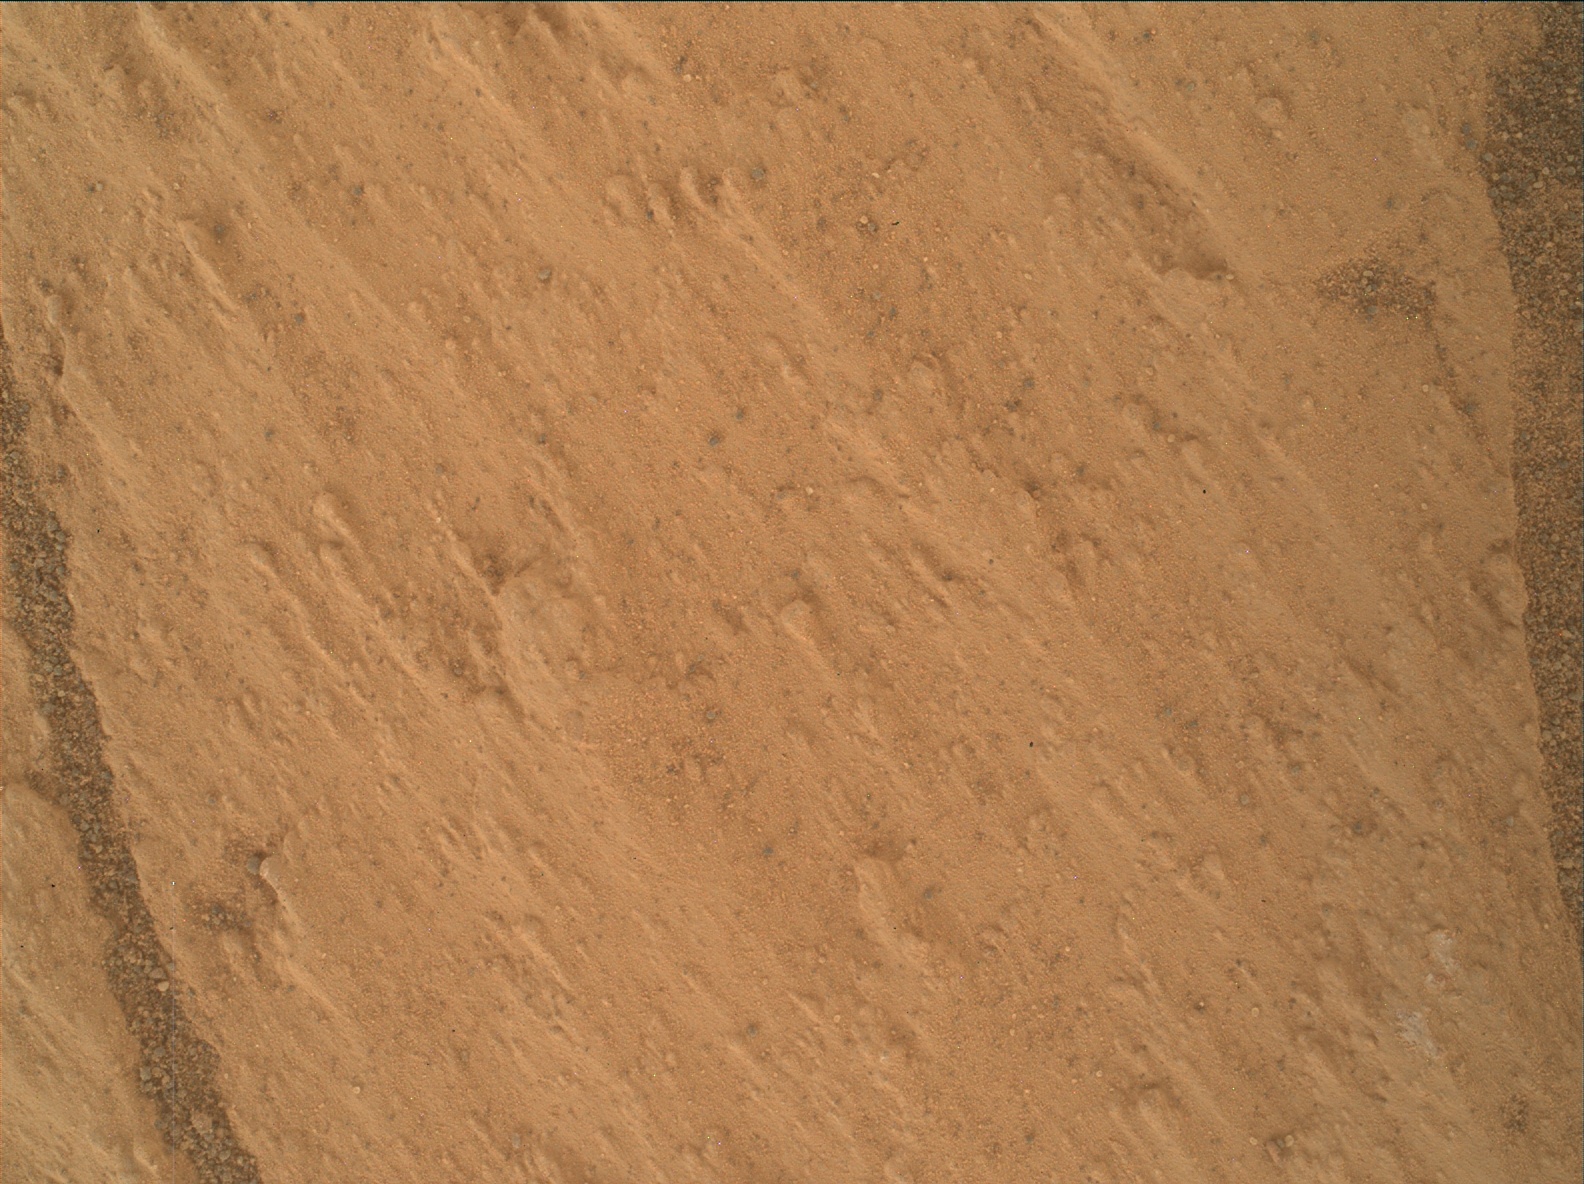 Nasa's Mars rover Curiosity acquired this image using its Mars Hand Lens Imager (MAHLI) on Sol 3329